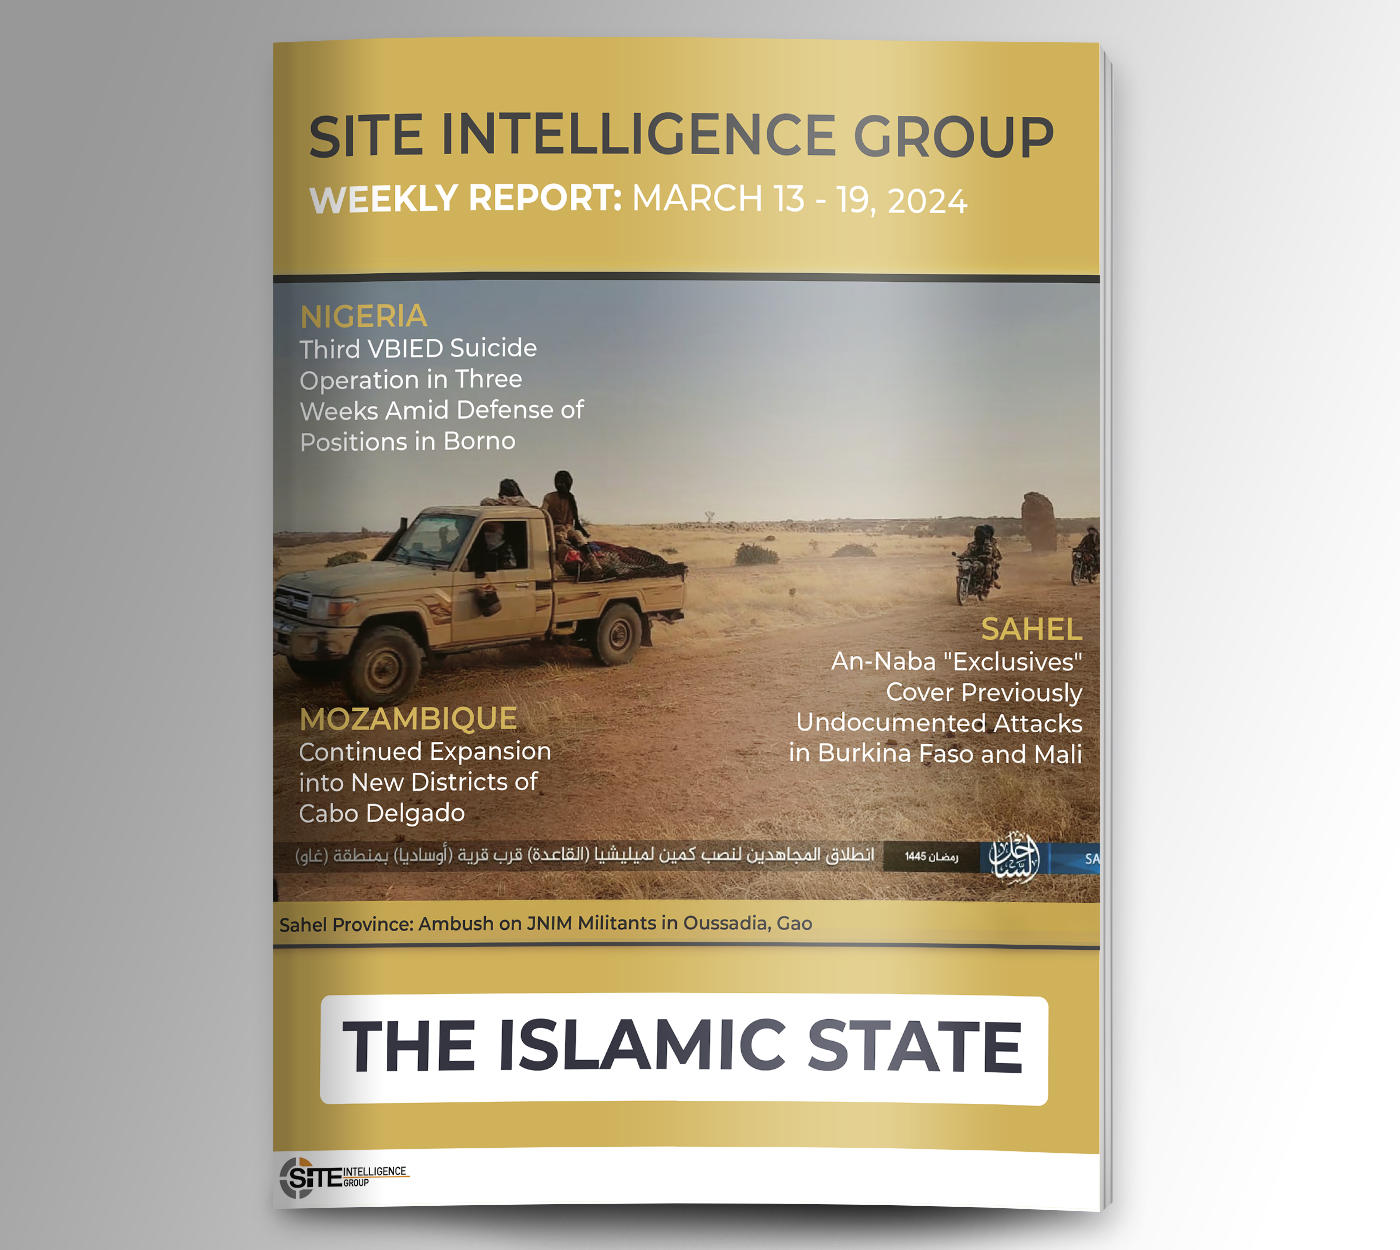 Weekly inSITE on the Islamic State for March 13-19, 2024